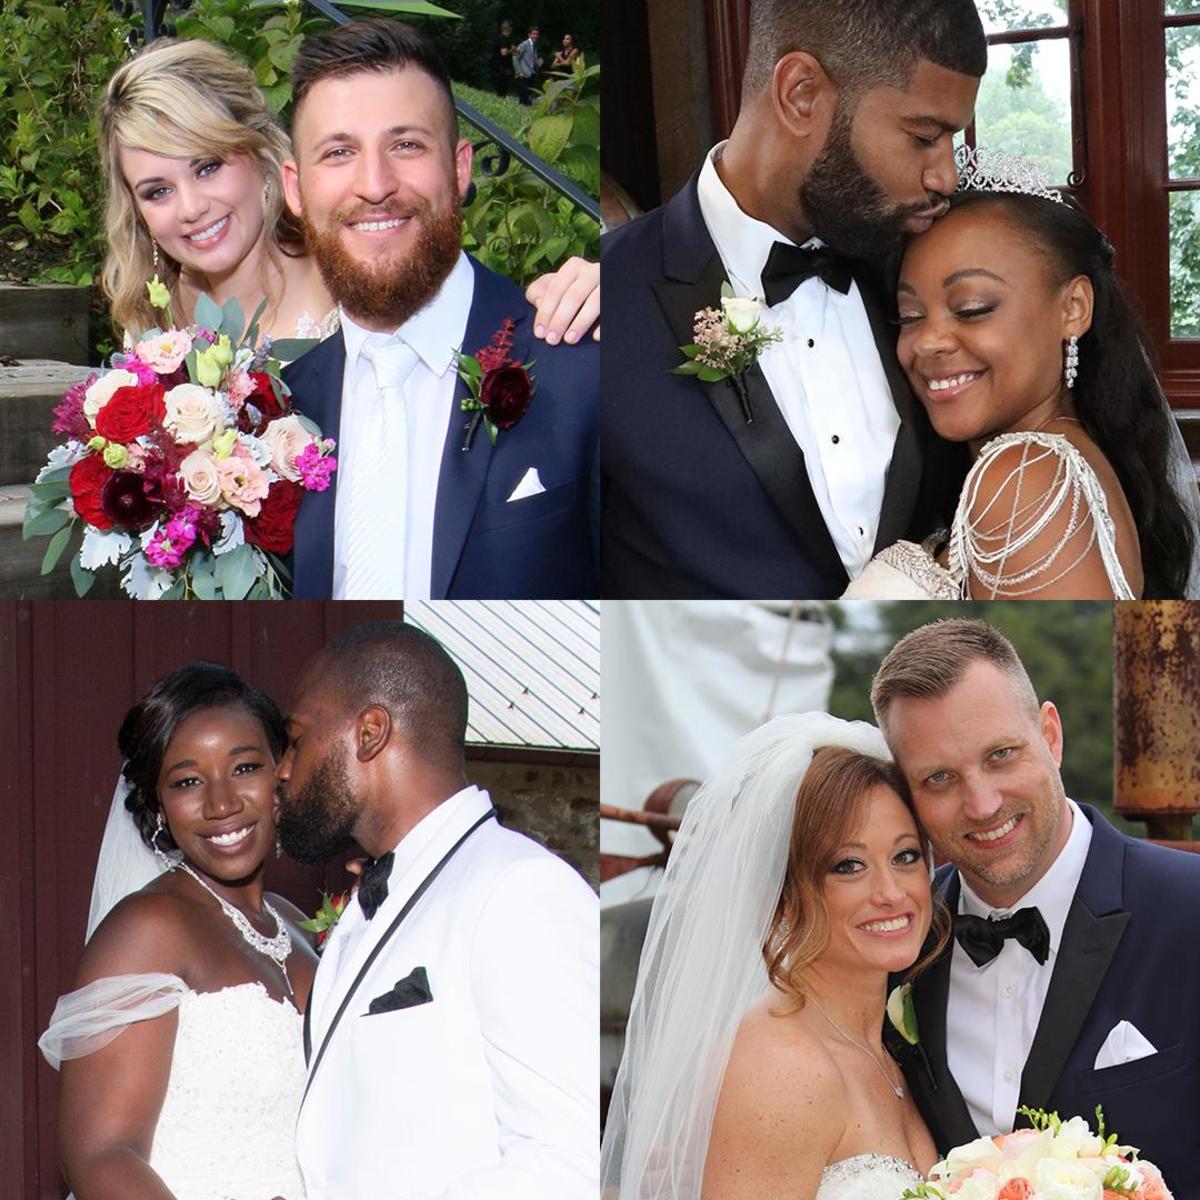 'Married at First Sight' Season 8 Finale: Who Stayed Married and Who Decided to Divorce?